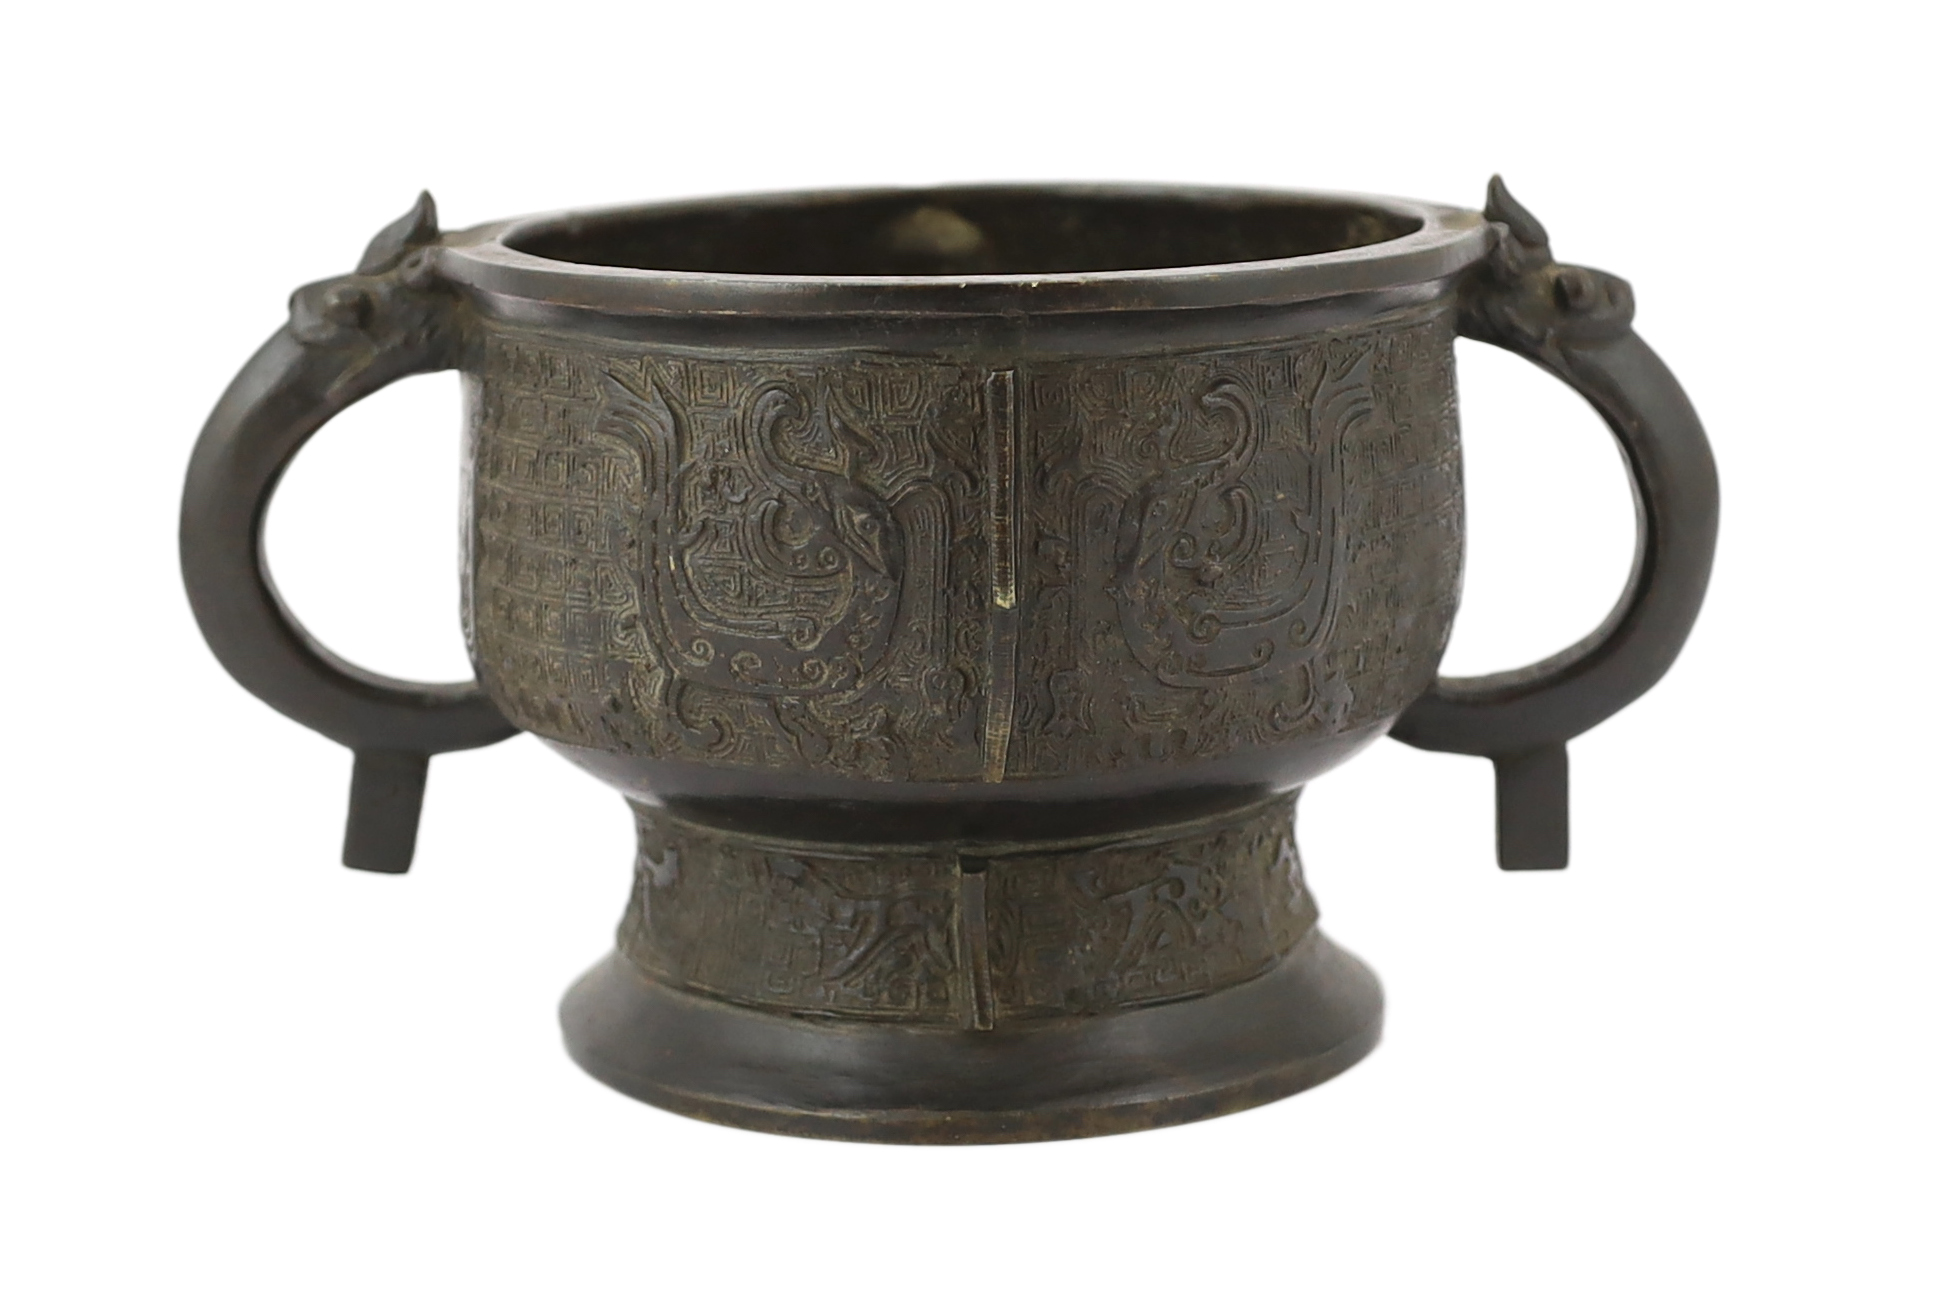 A large Chinese archaistic bronze censer, gui, 17th century                                                                                                                                                                 